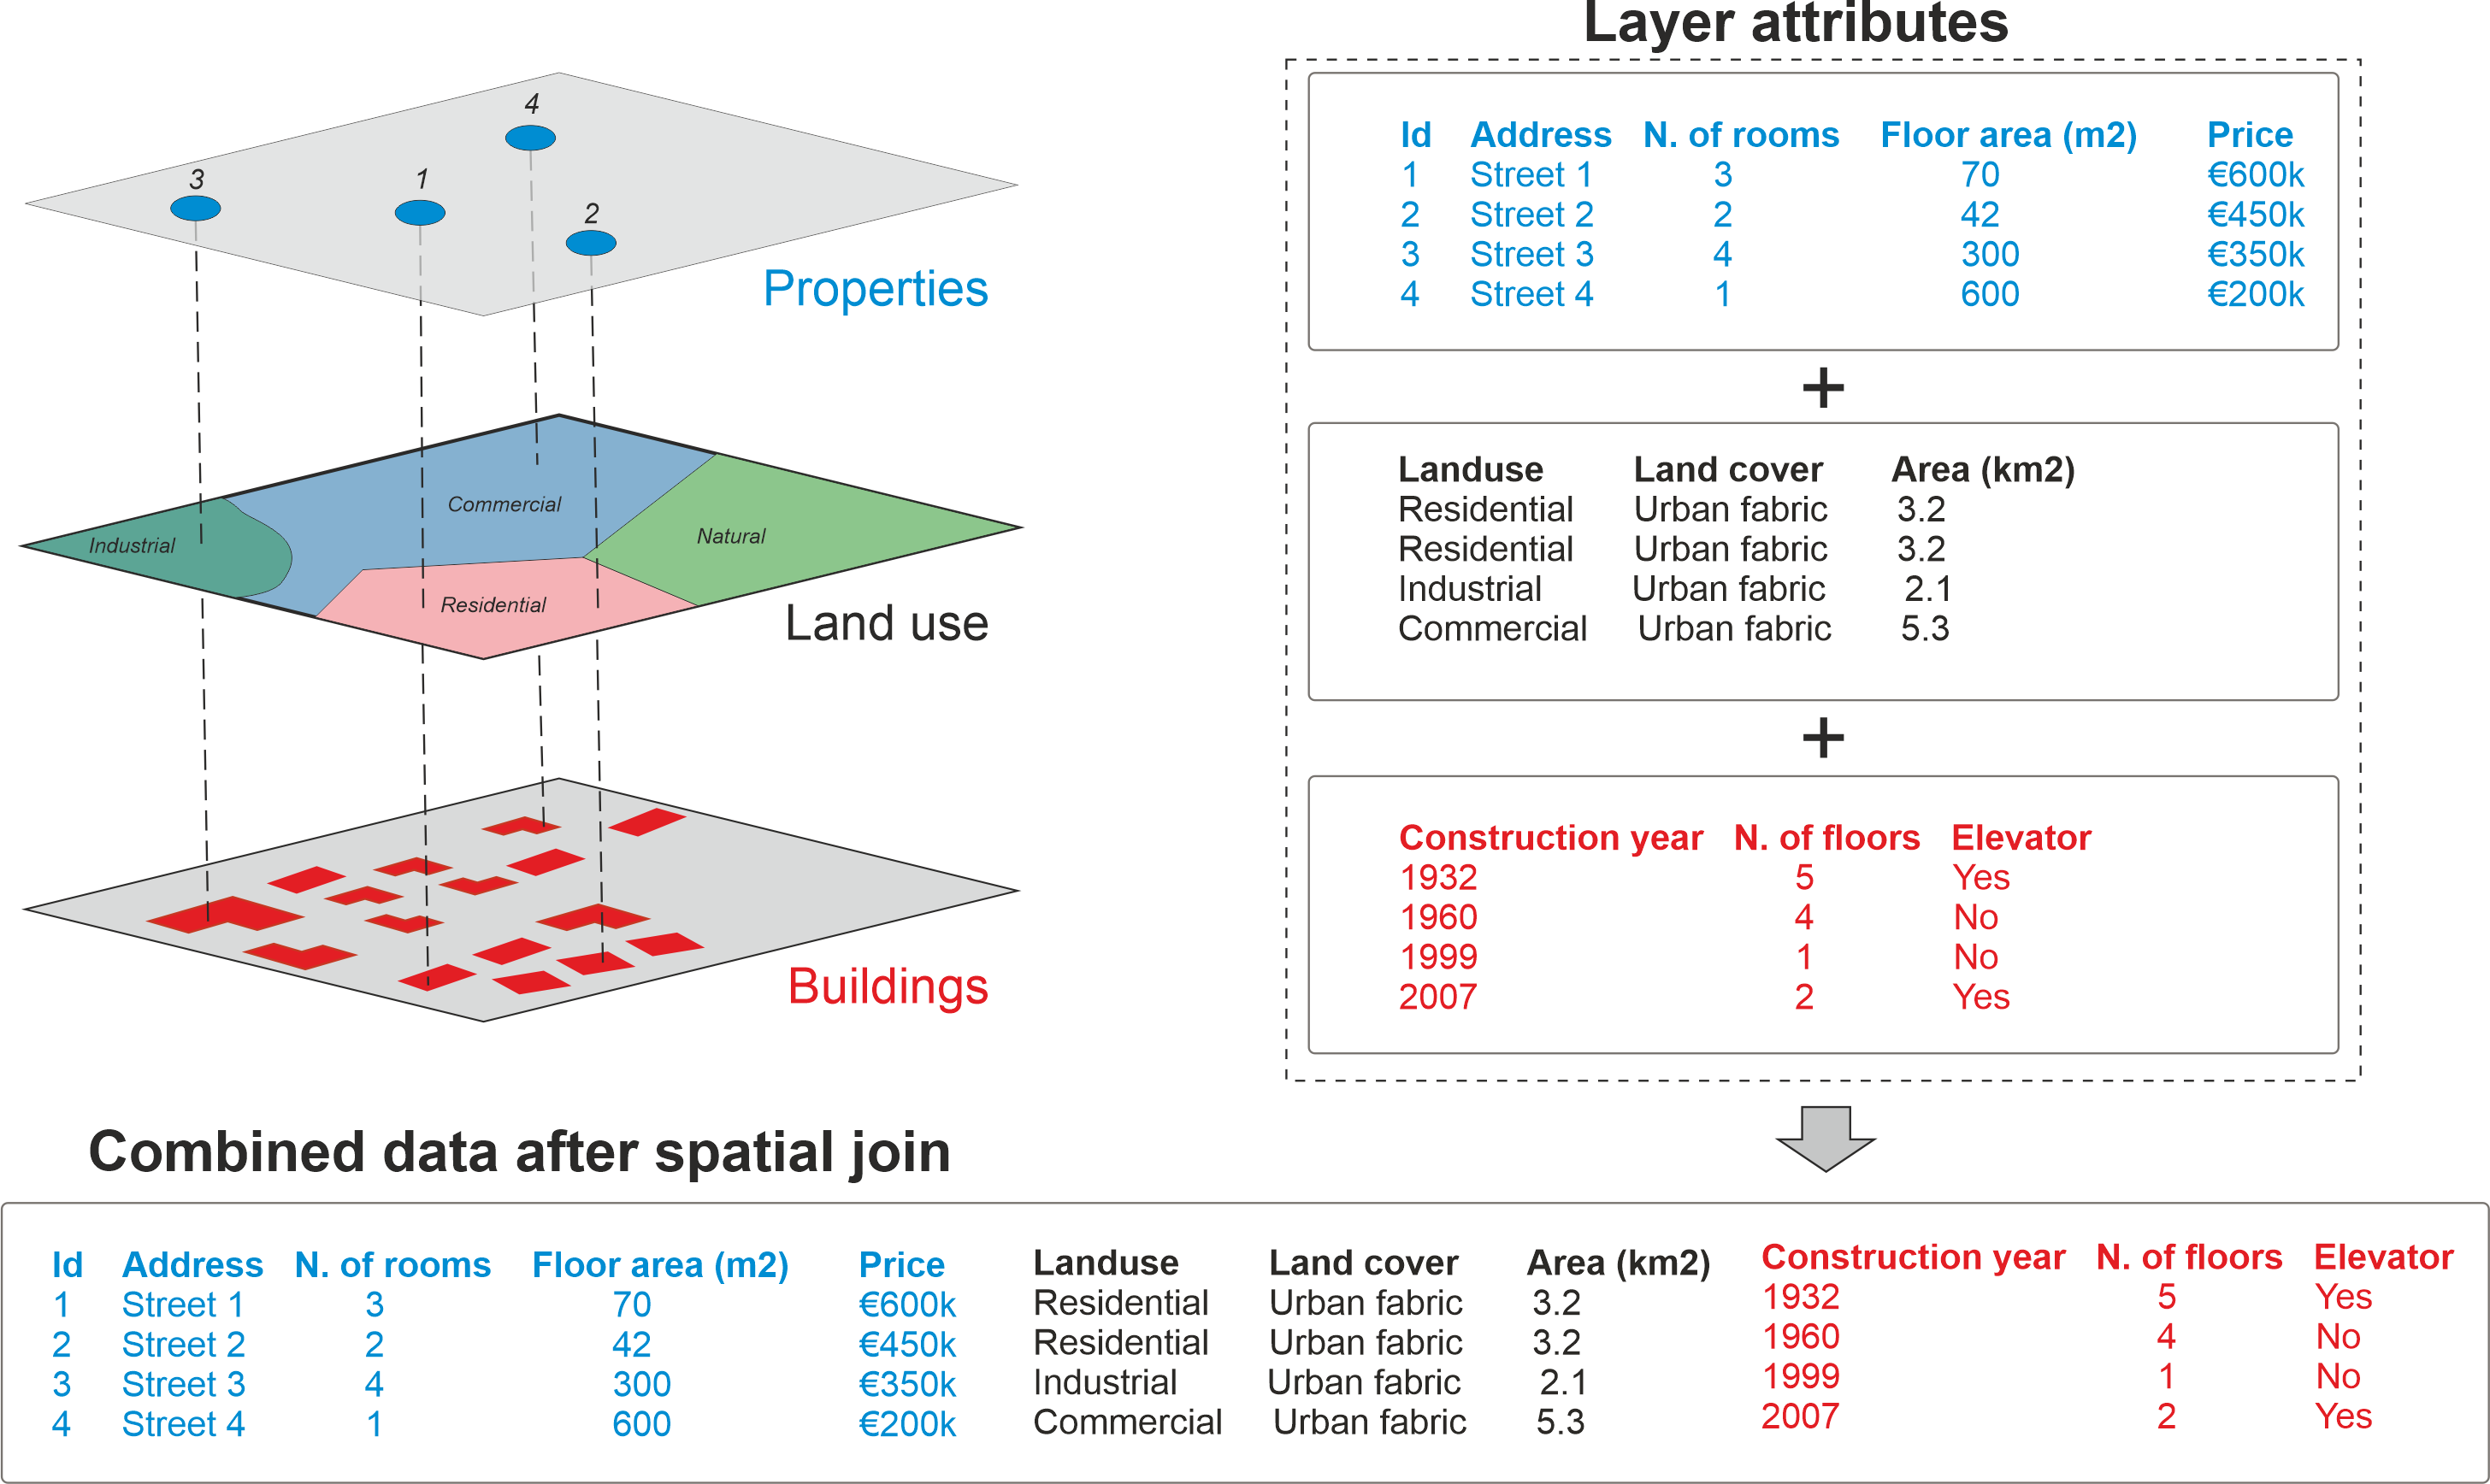 Figure 6.38. Spatial join allows you to combine attribute information from multiple layers based on spatial relationship.